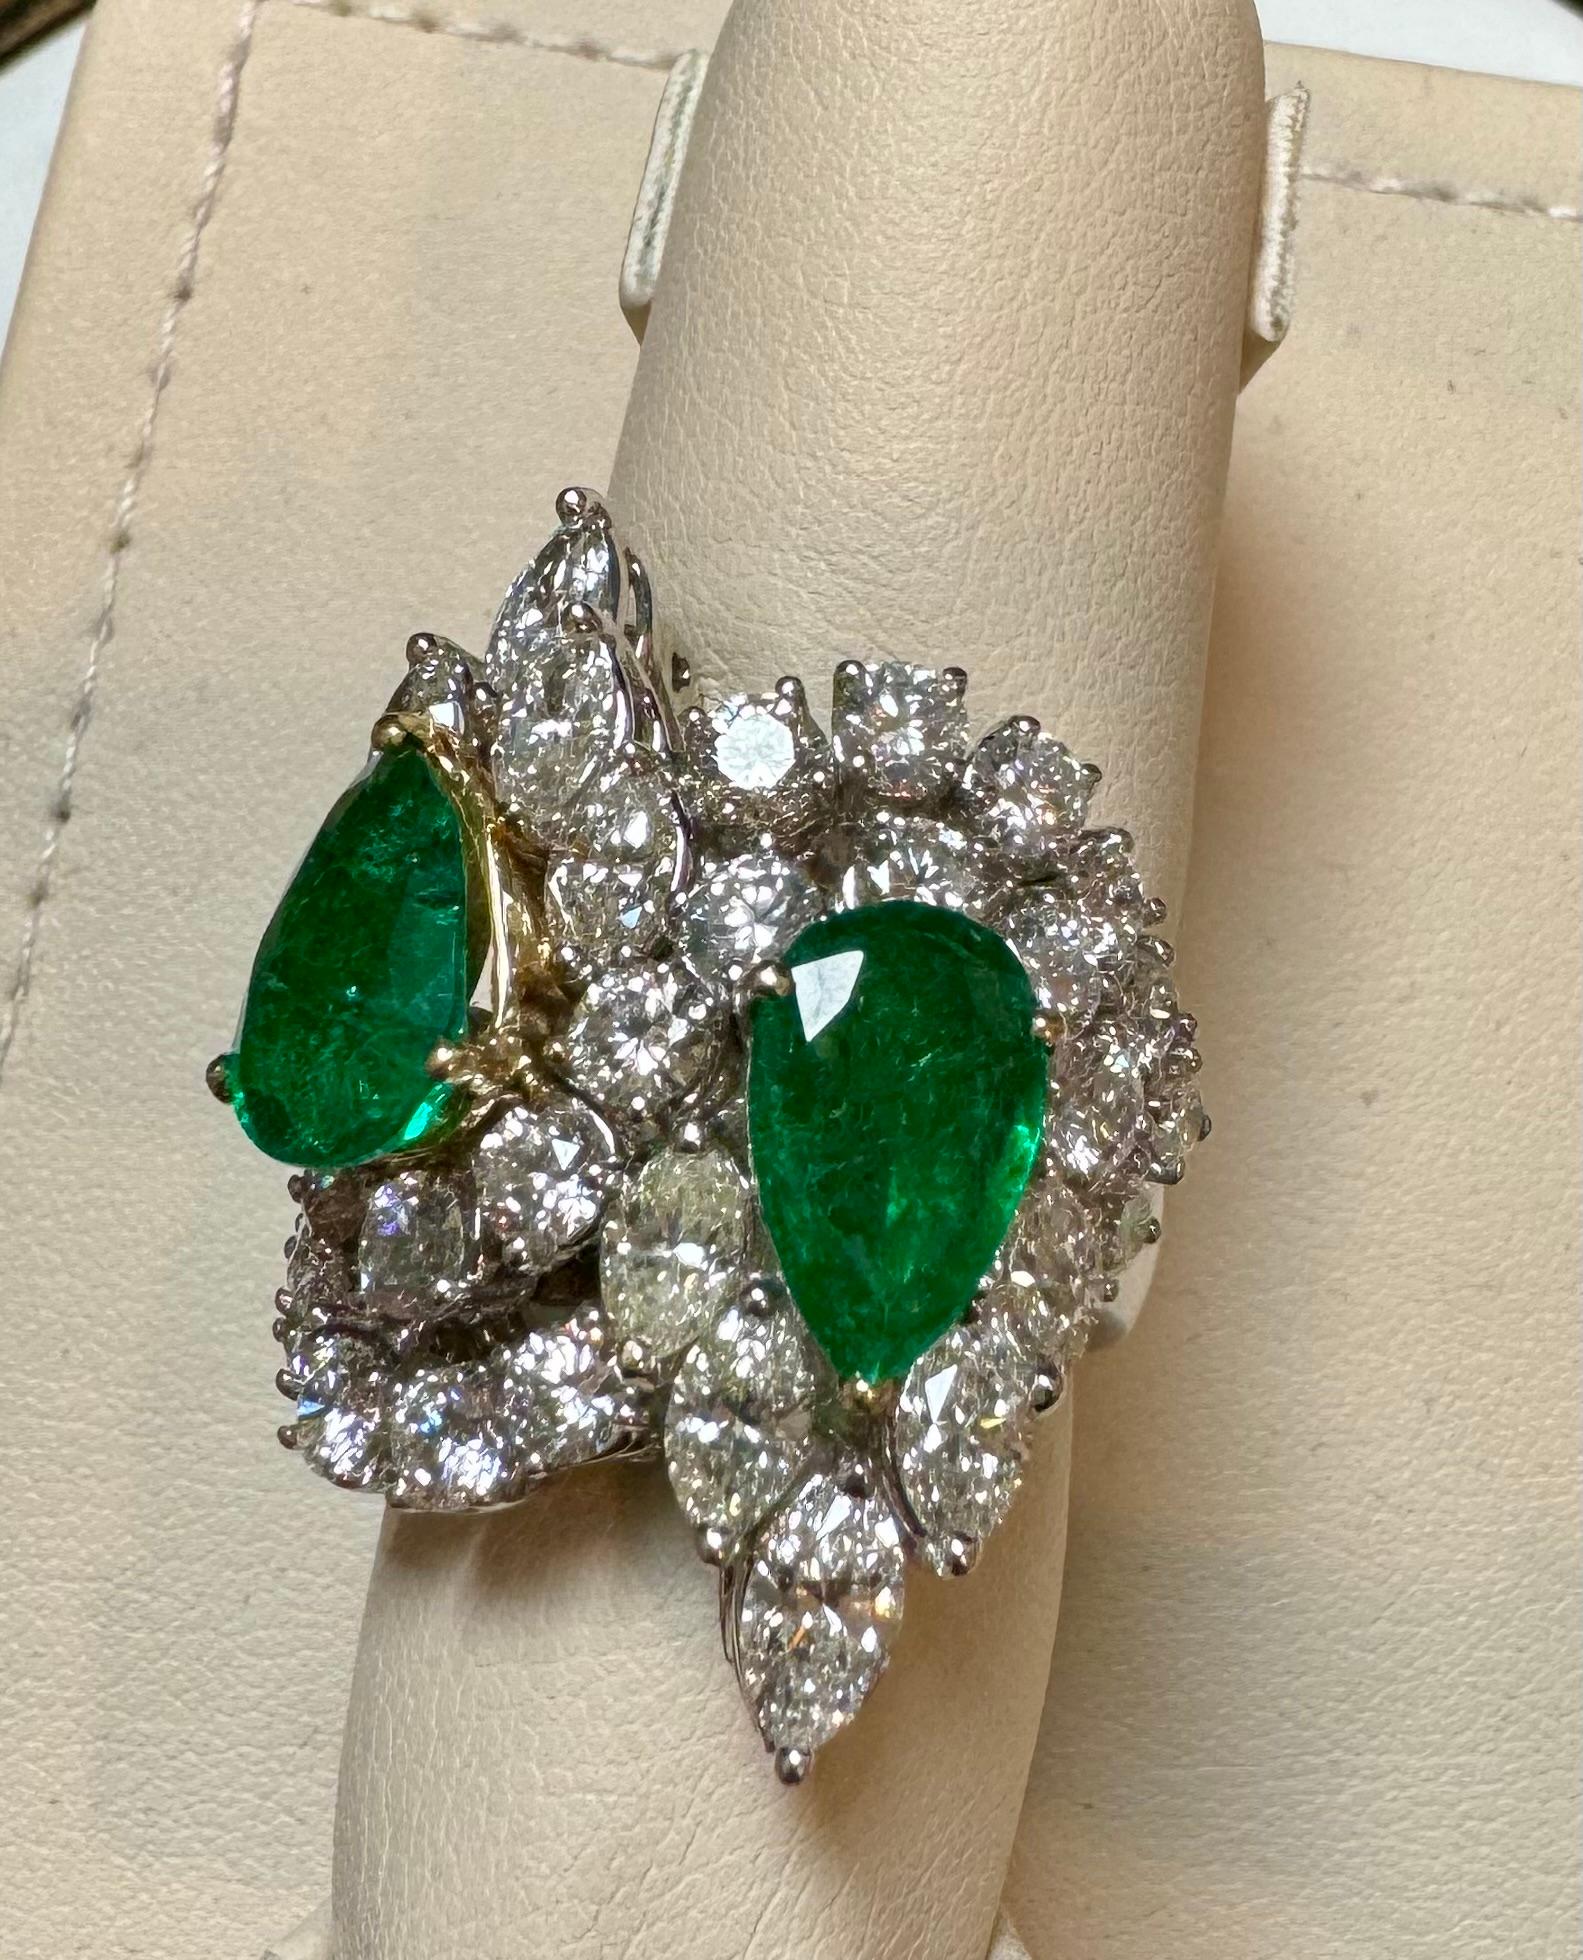 Introducing our exquisite 18 Karat White Gold Ring featuring two stunning Pear shape natural Zambian Emerald and 8.75 carats of diamonds. This ring is truly remarkable, showcasing the beauty of the emerald and the brilliance of the